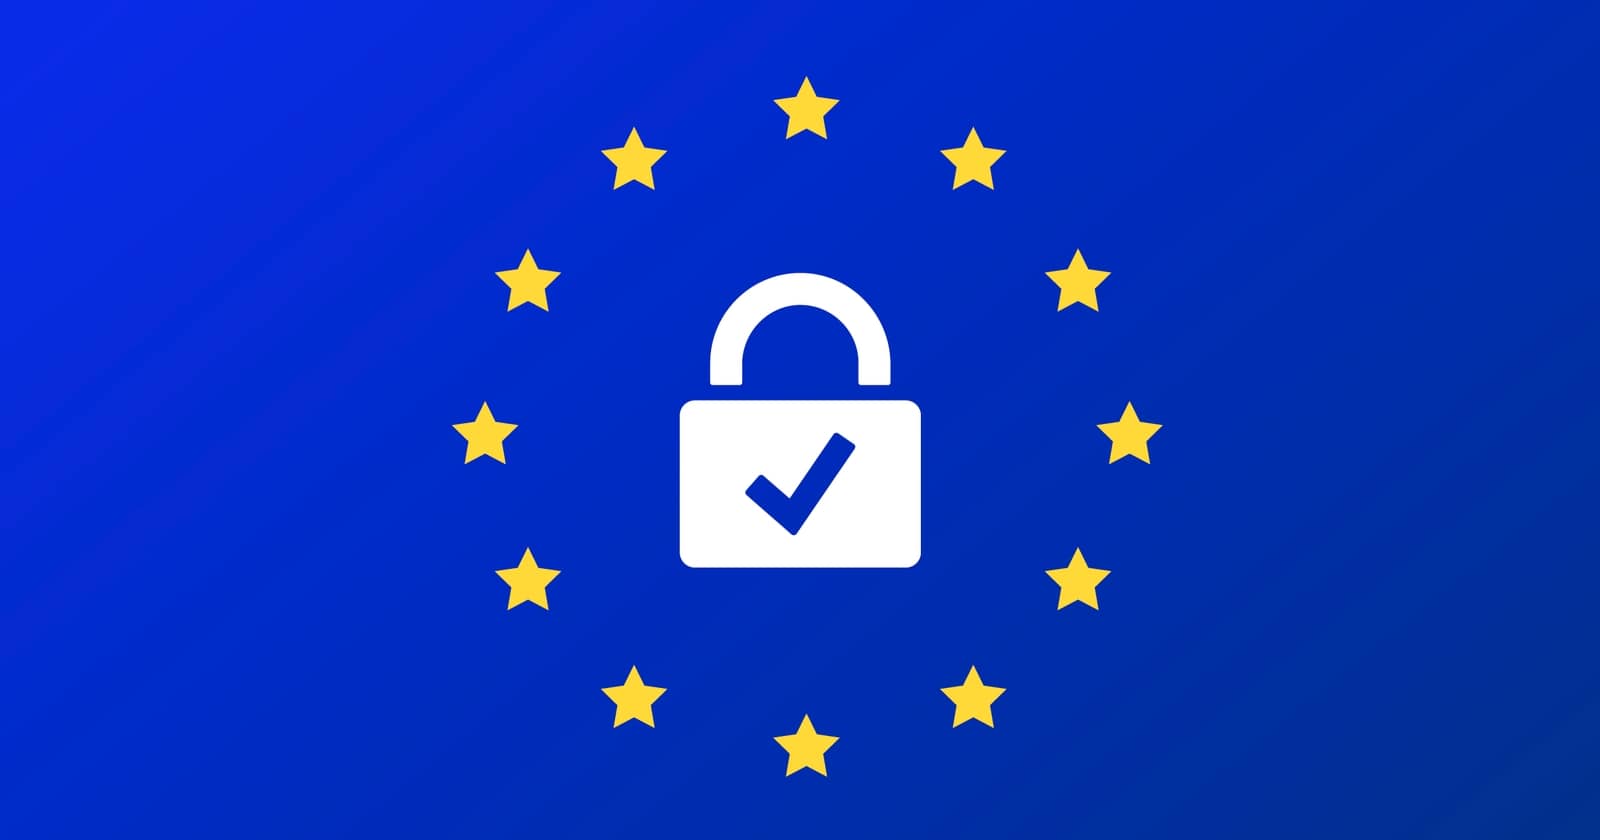 2 years with GDPR – Important verdicts and rulings